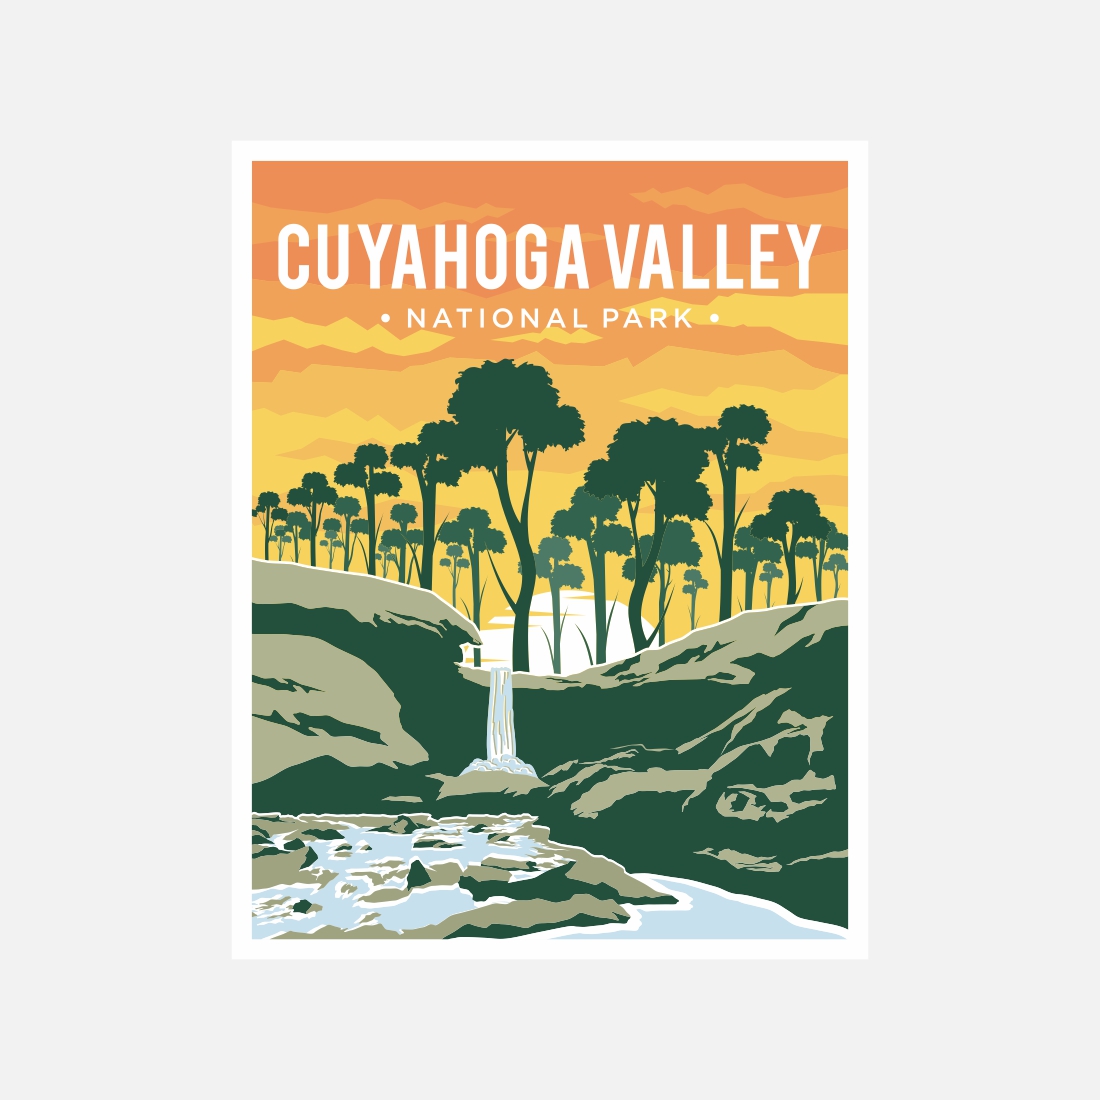 Cuyahoga Valley National Park poster vector illustration design – Only $8 preview image.